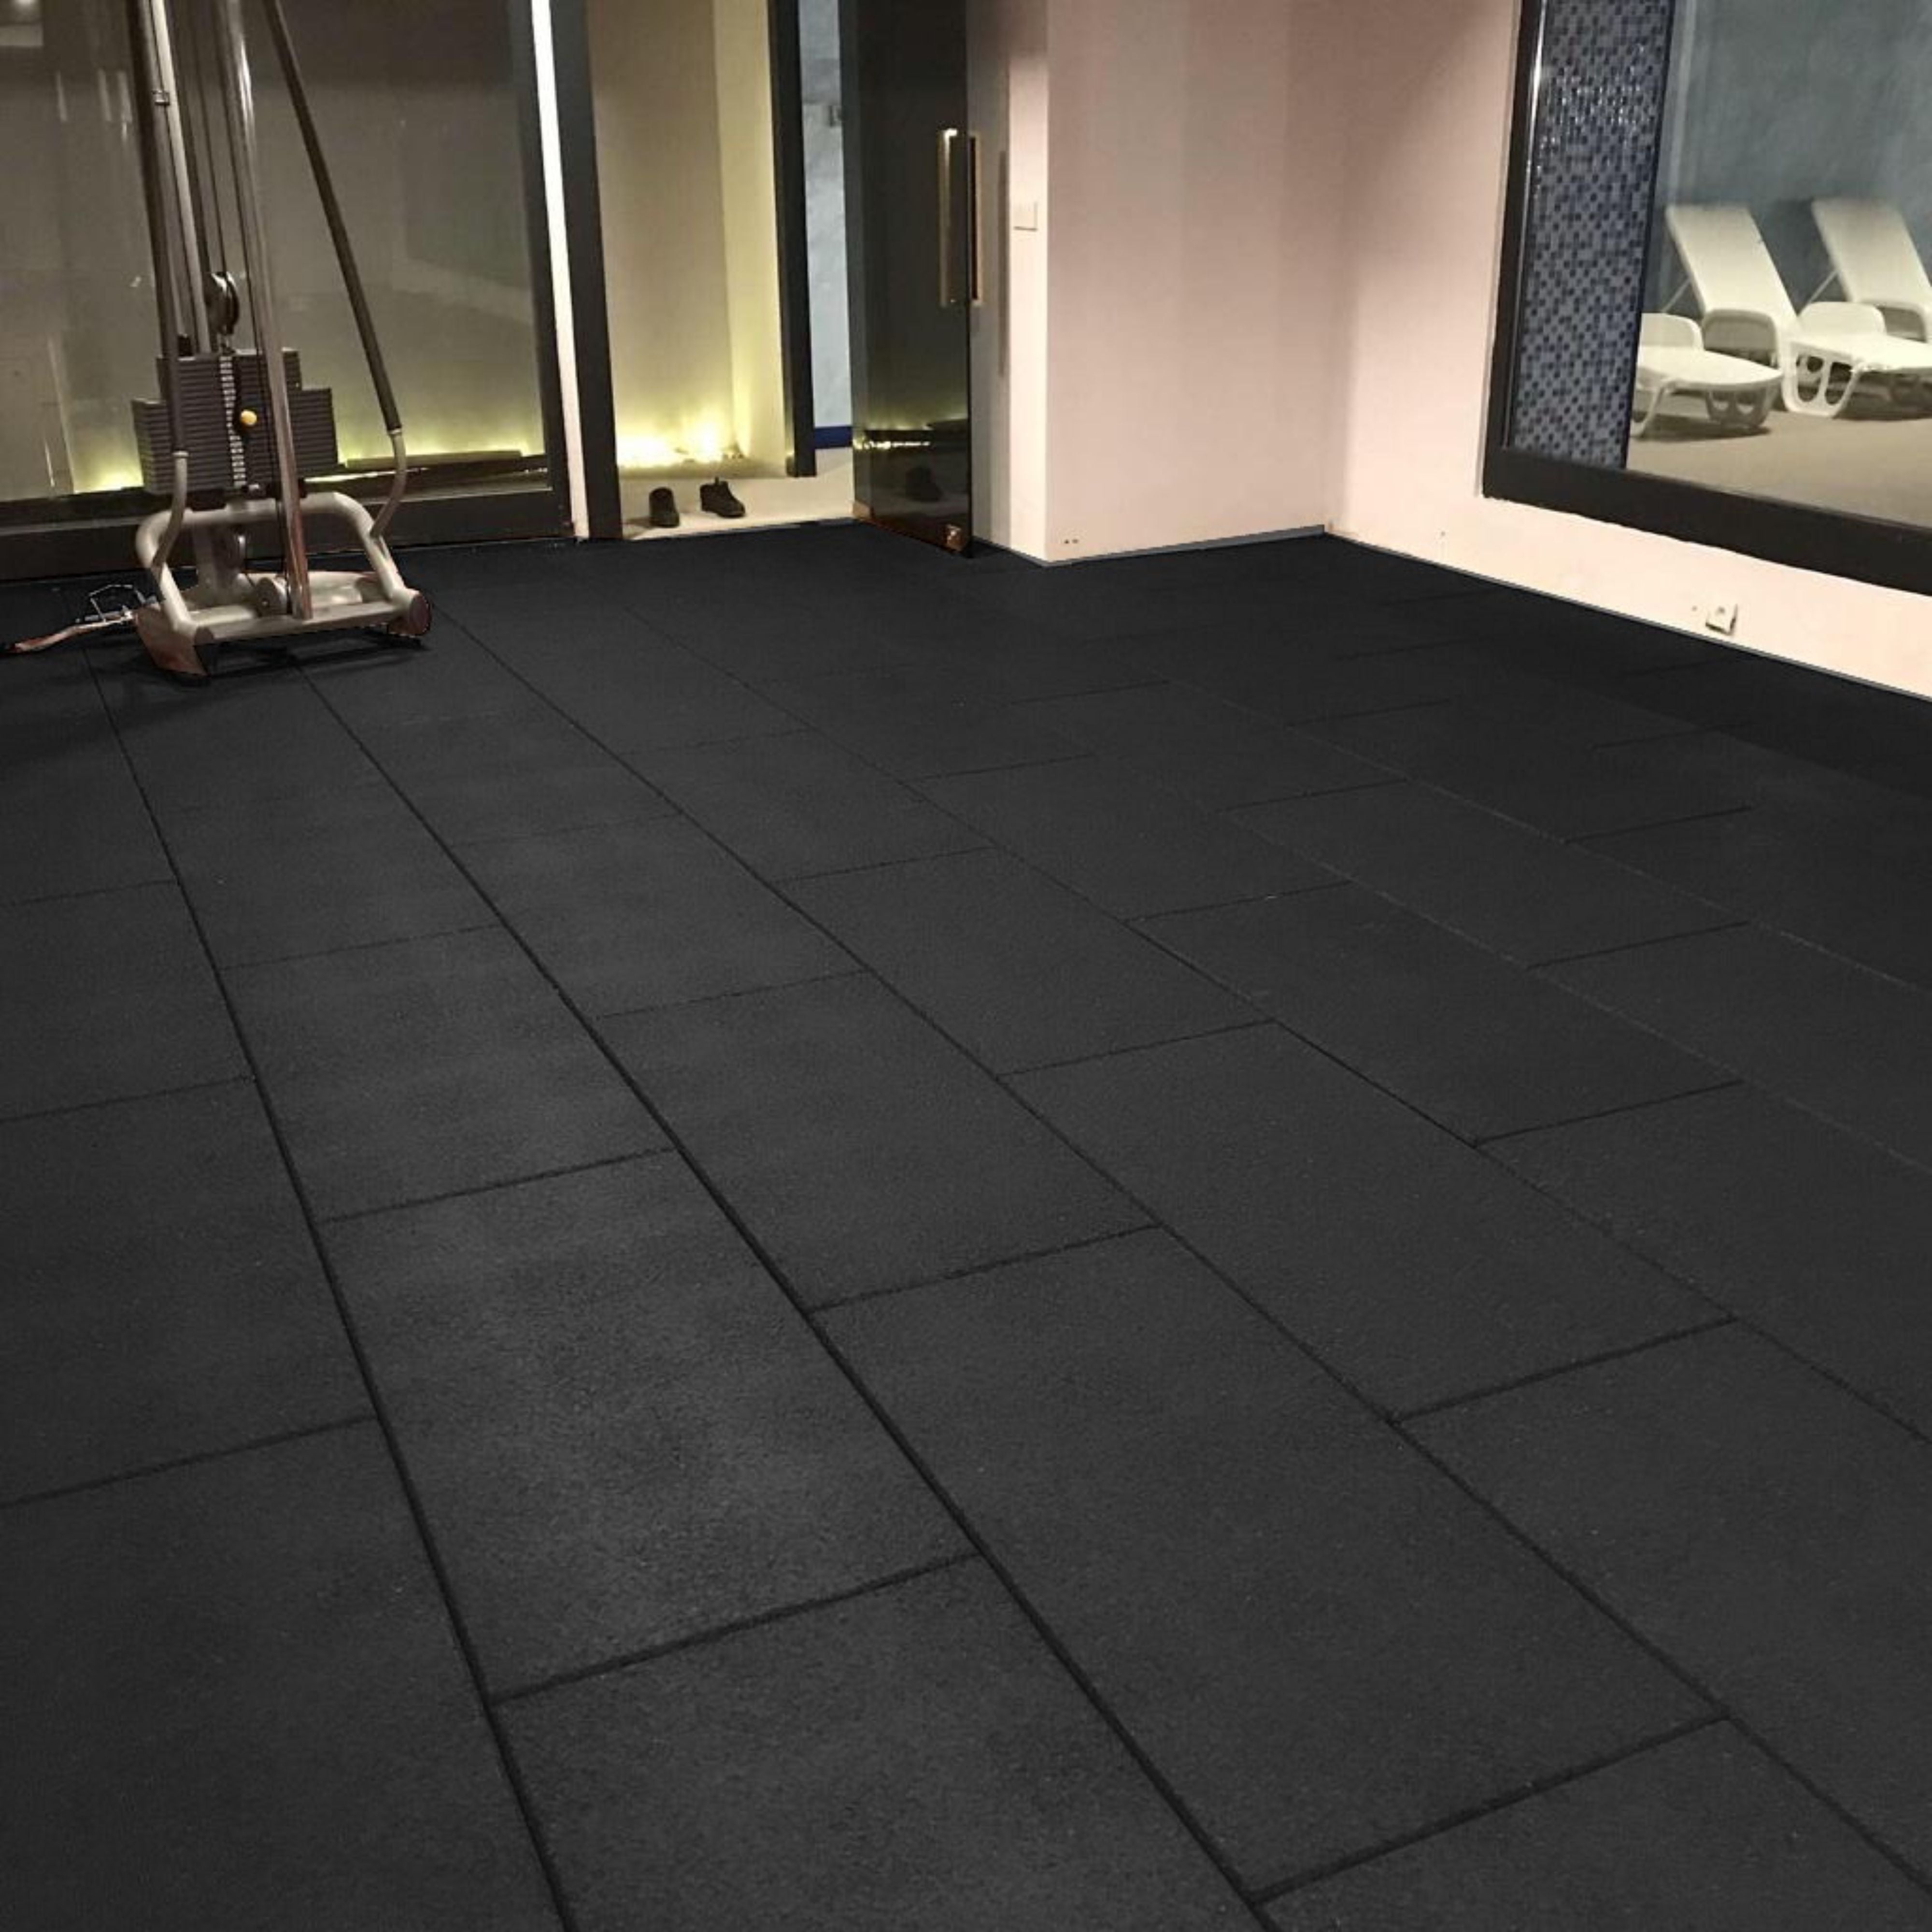 Cannons UK Rubber Gym Flooring samples - Cannons UK